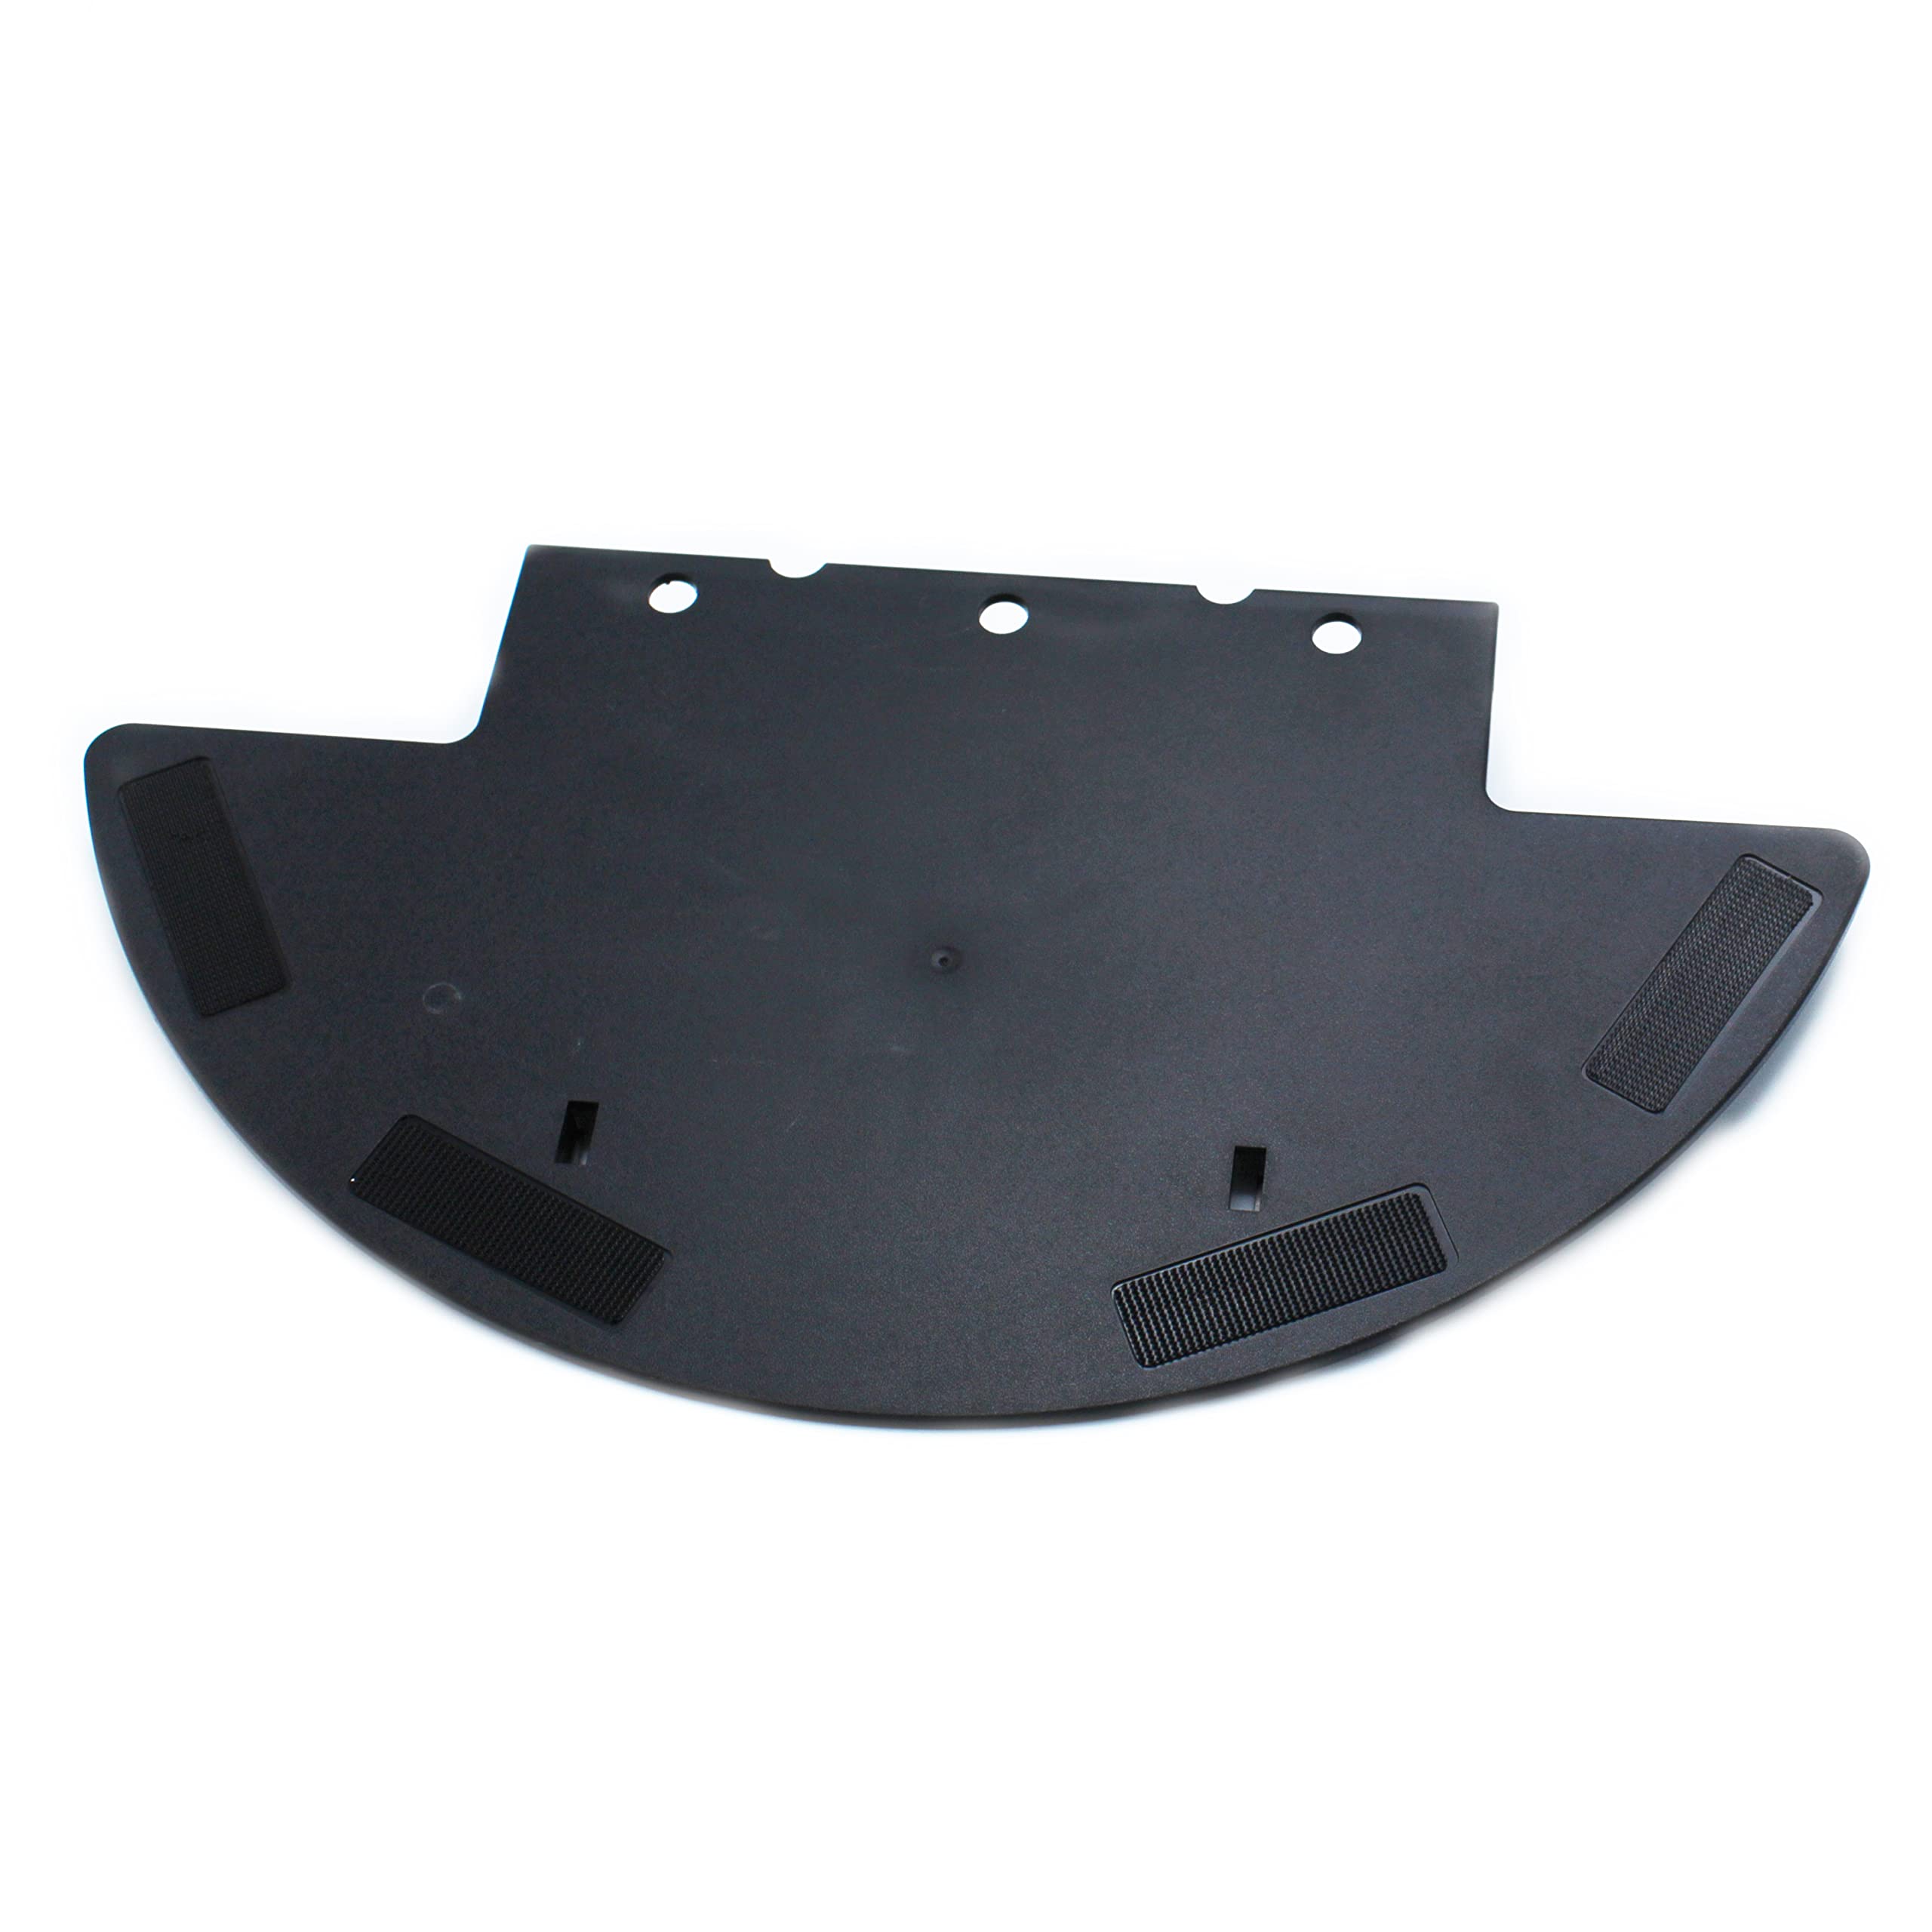 Velway mopping plate; mopping Plate ; vacuum cleaner plate; robotic vacuum cleaner mopping plate